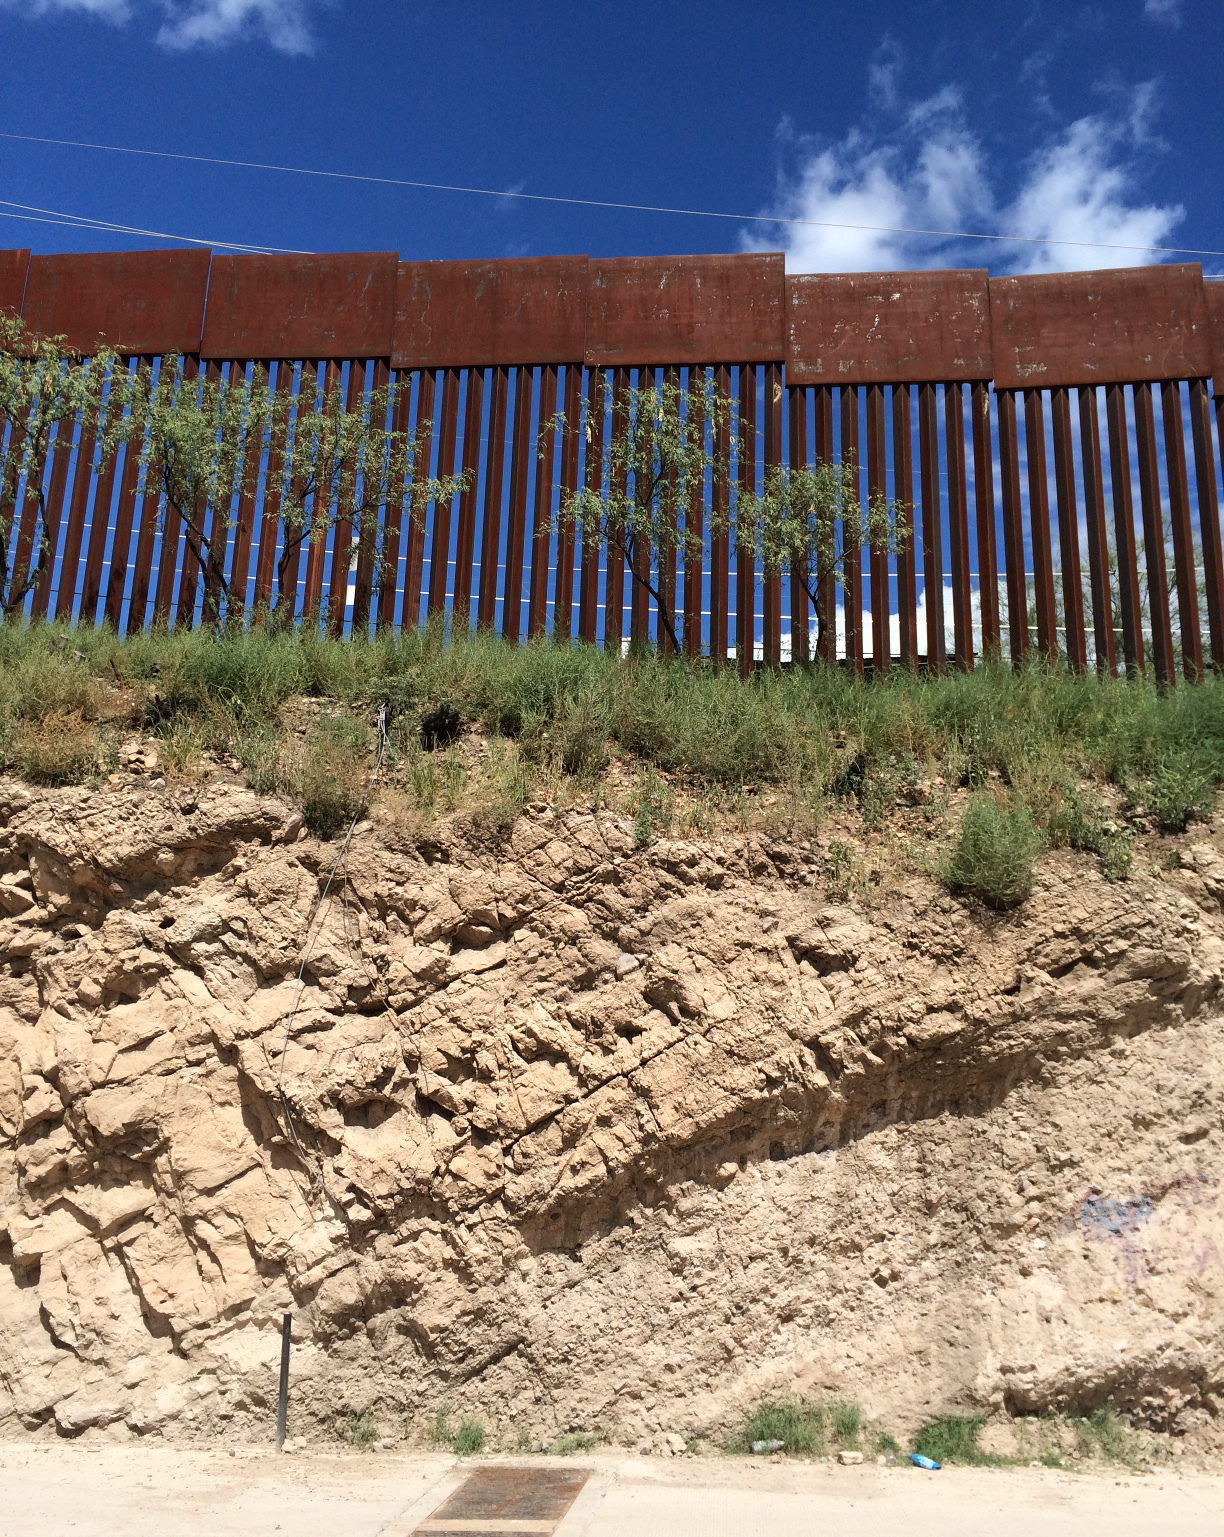 The fence between Nogales, Mexico, and Nogales, Ariz., sits atop a steep embankment. It's 20 to 25 feet high, with 3.5-inch gaps between the bars. (Photo by John Burnett/NPR)